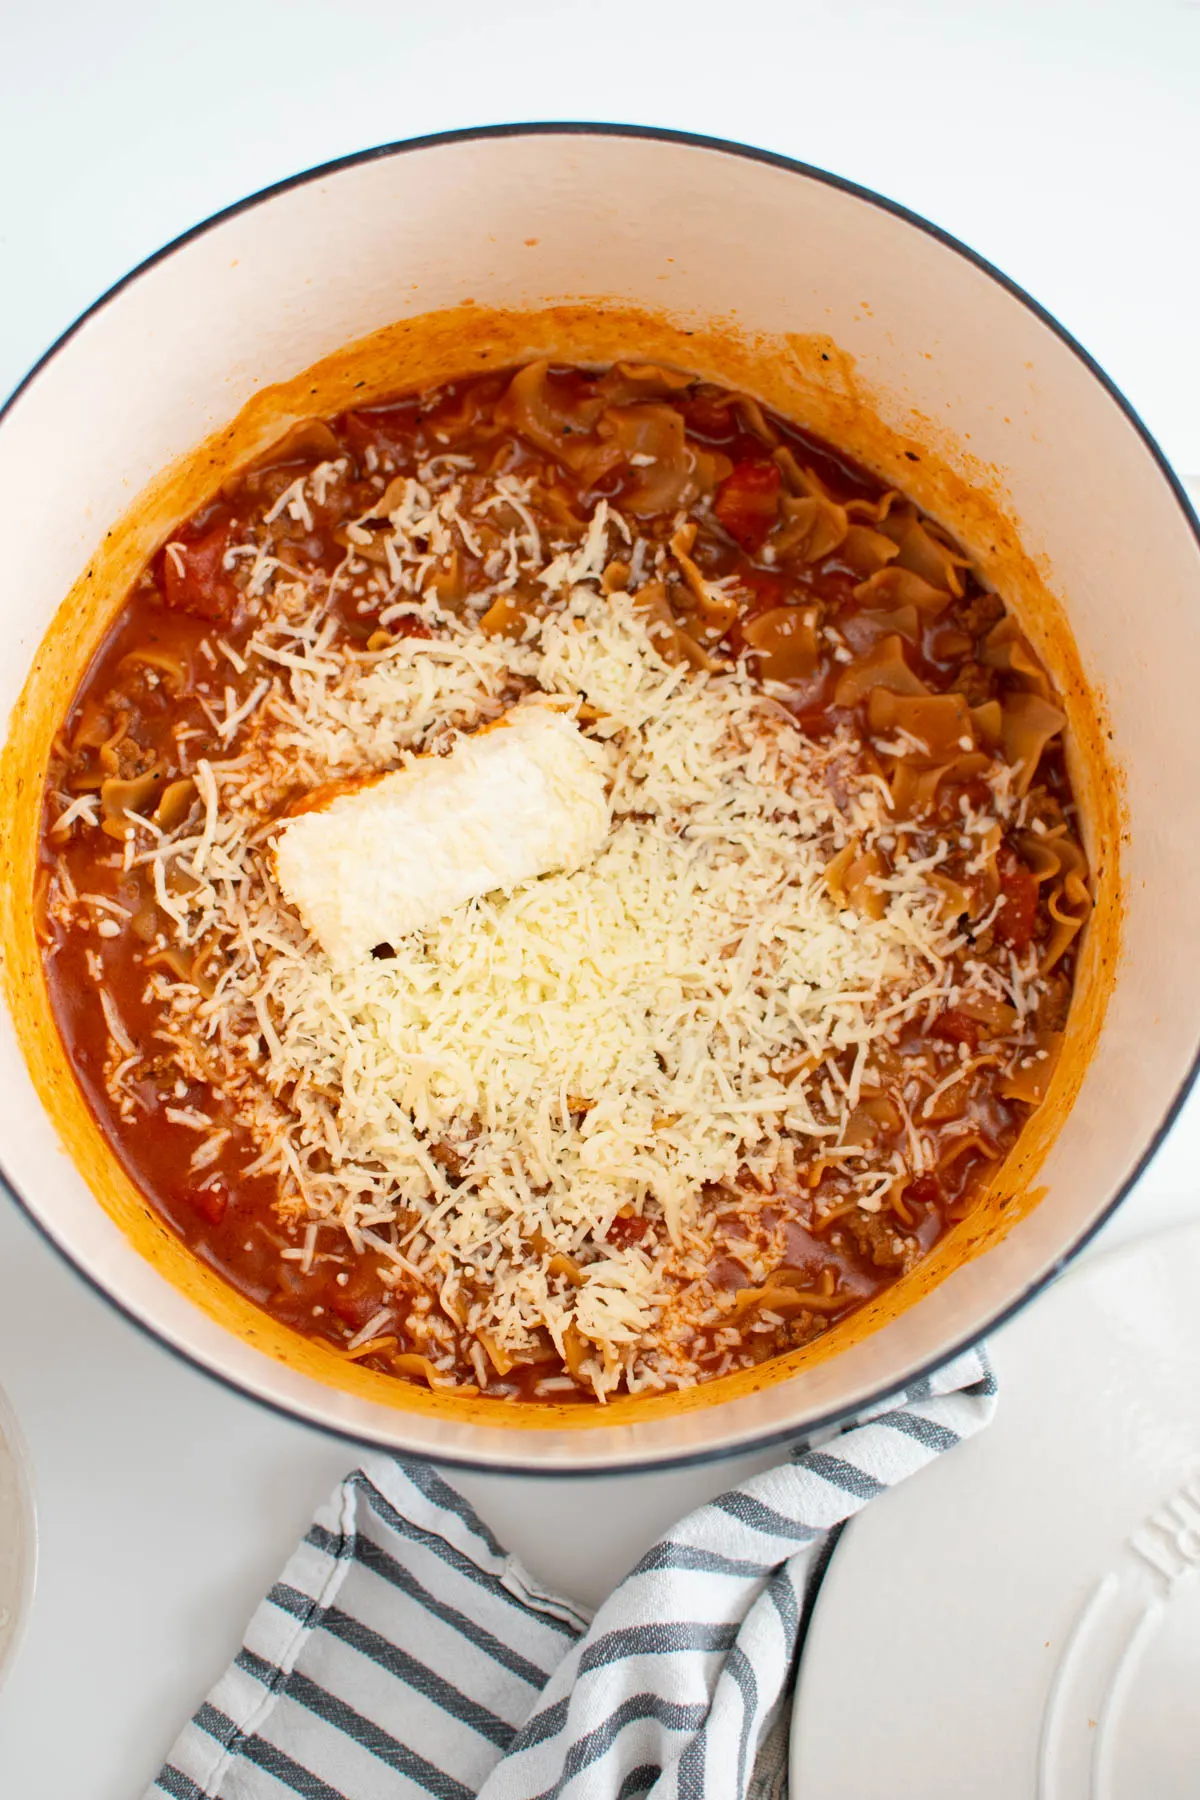 Block of cream cheese and shredded mozzarella in pot of meat sauce and pasta.